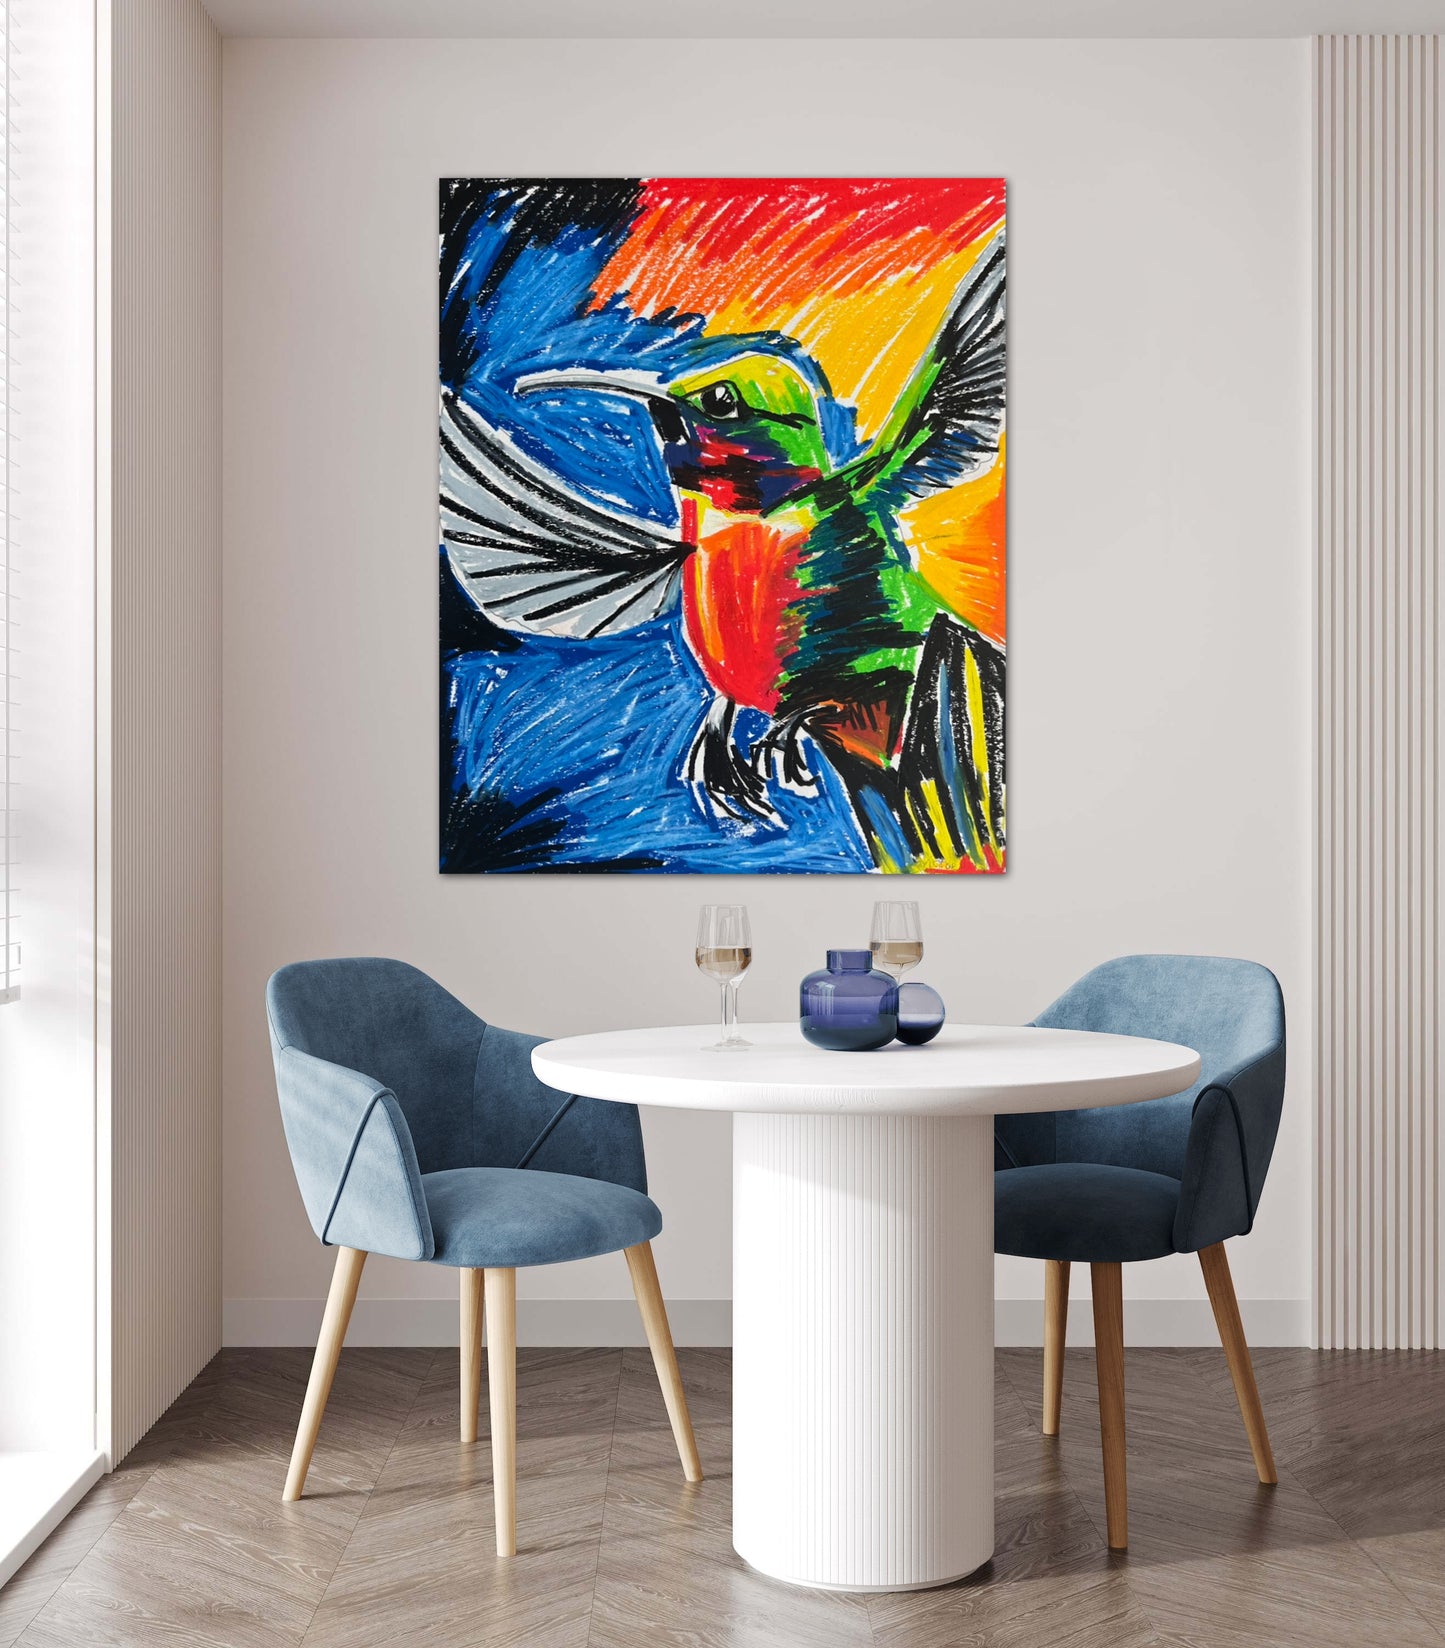 The Colorful Hummingbird - Print, Poster, Stretched Canvas Print